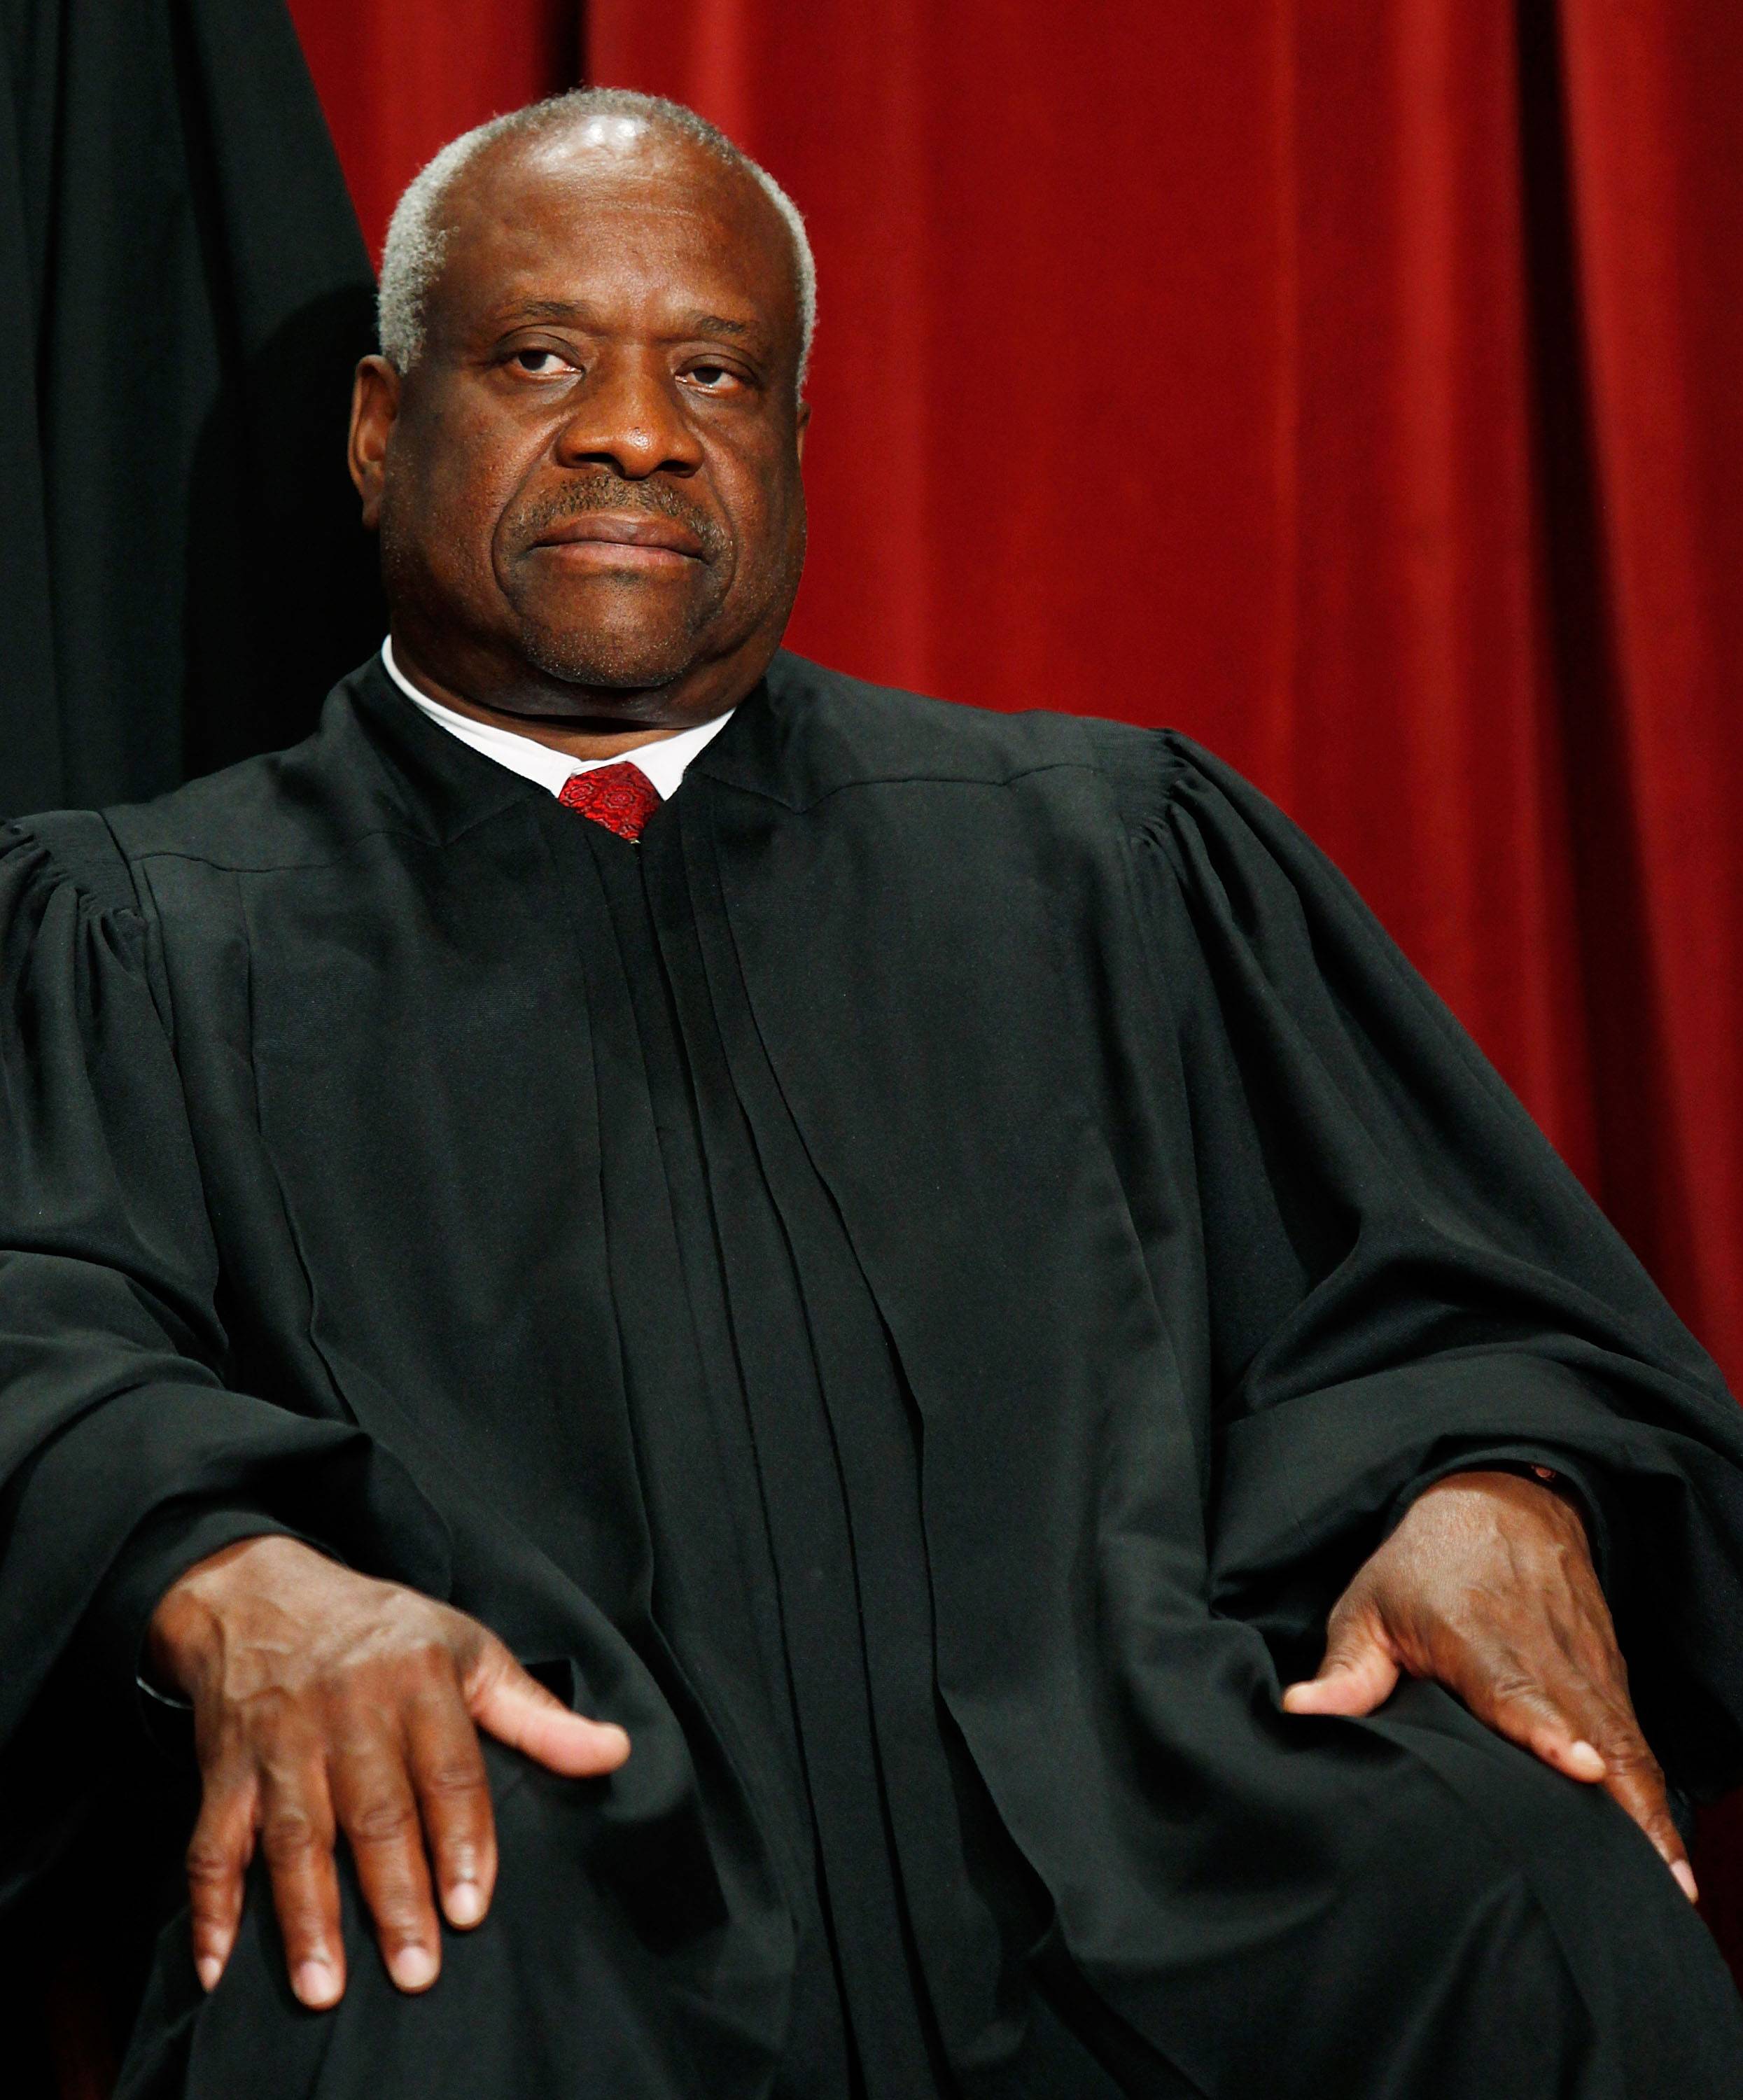 Clarence Thomas - U.S. Supreme Court Justice Clarence Thomas is the second African-American to serve on the nation’s highest court. He was appointed by former President George H.W. Bush to replace the retiring Thurgood Marshall, who, in many ways, is his polar opposite.(Photo: Mark Wilson/Getty Images)